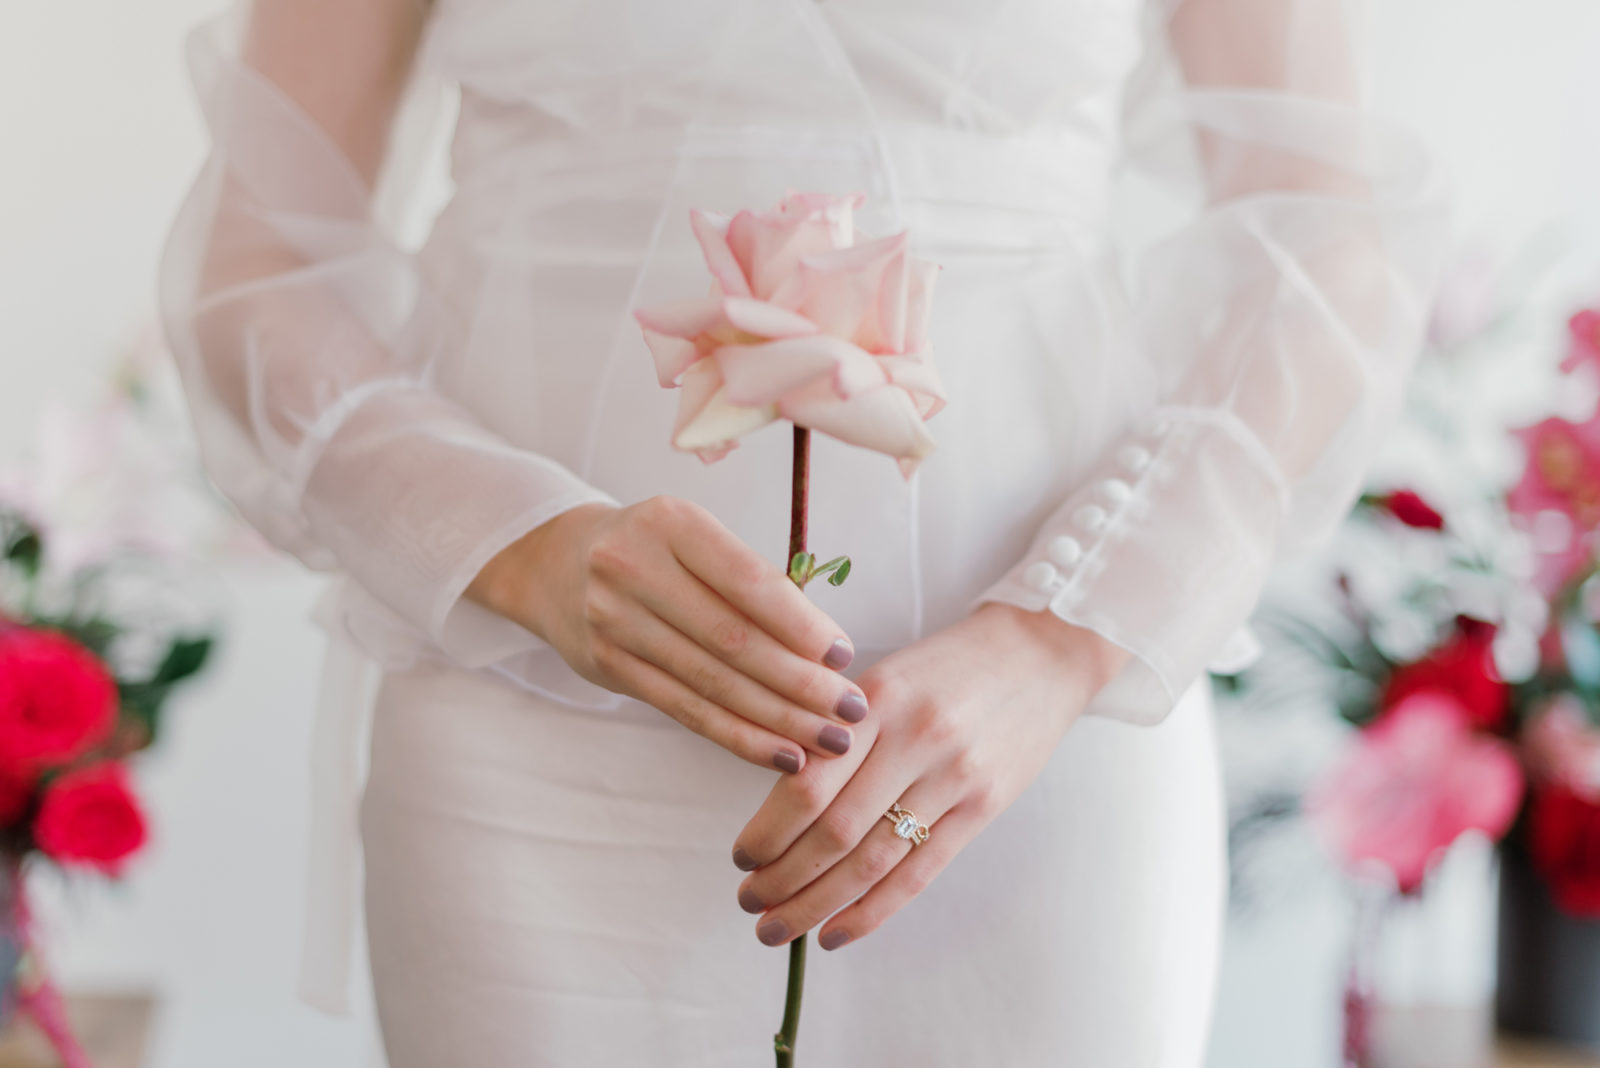 Bride poses with a pink garden rose for this modern microwedding inspiration